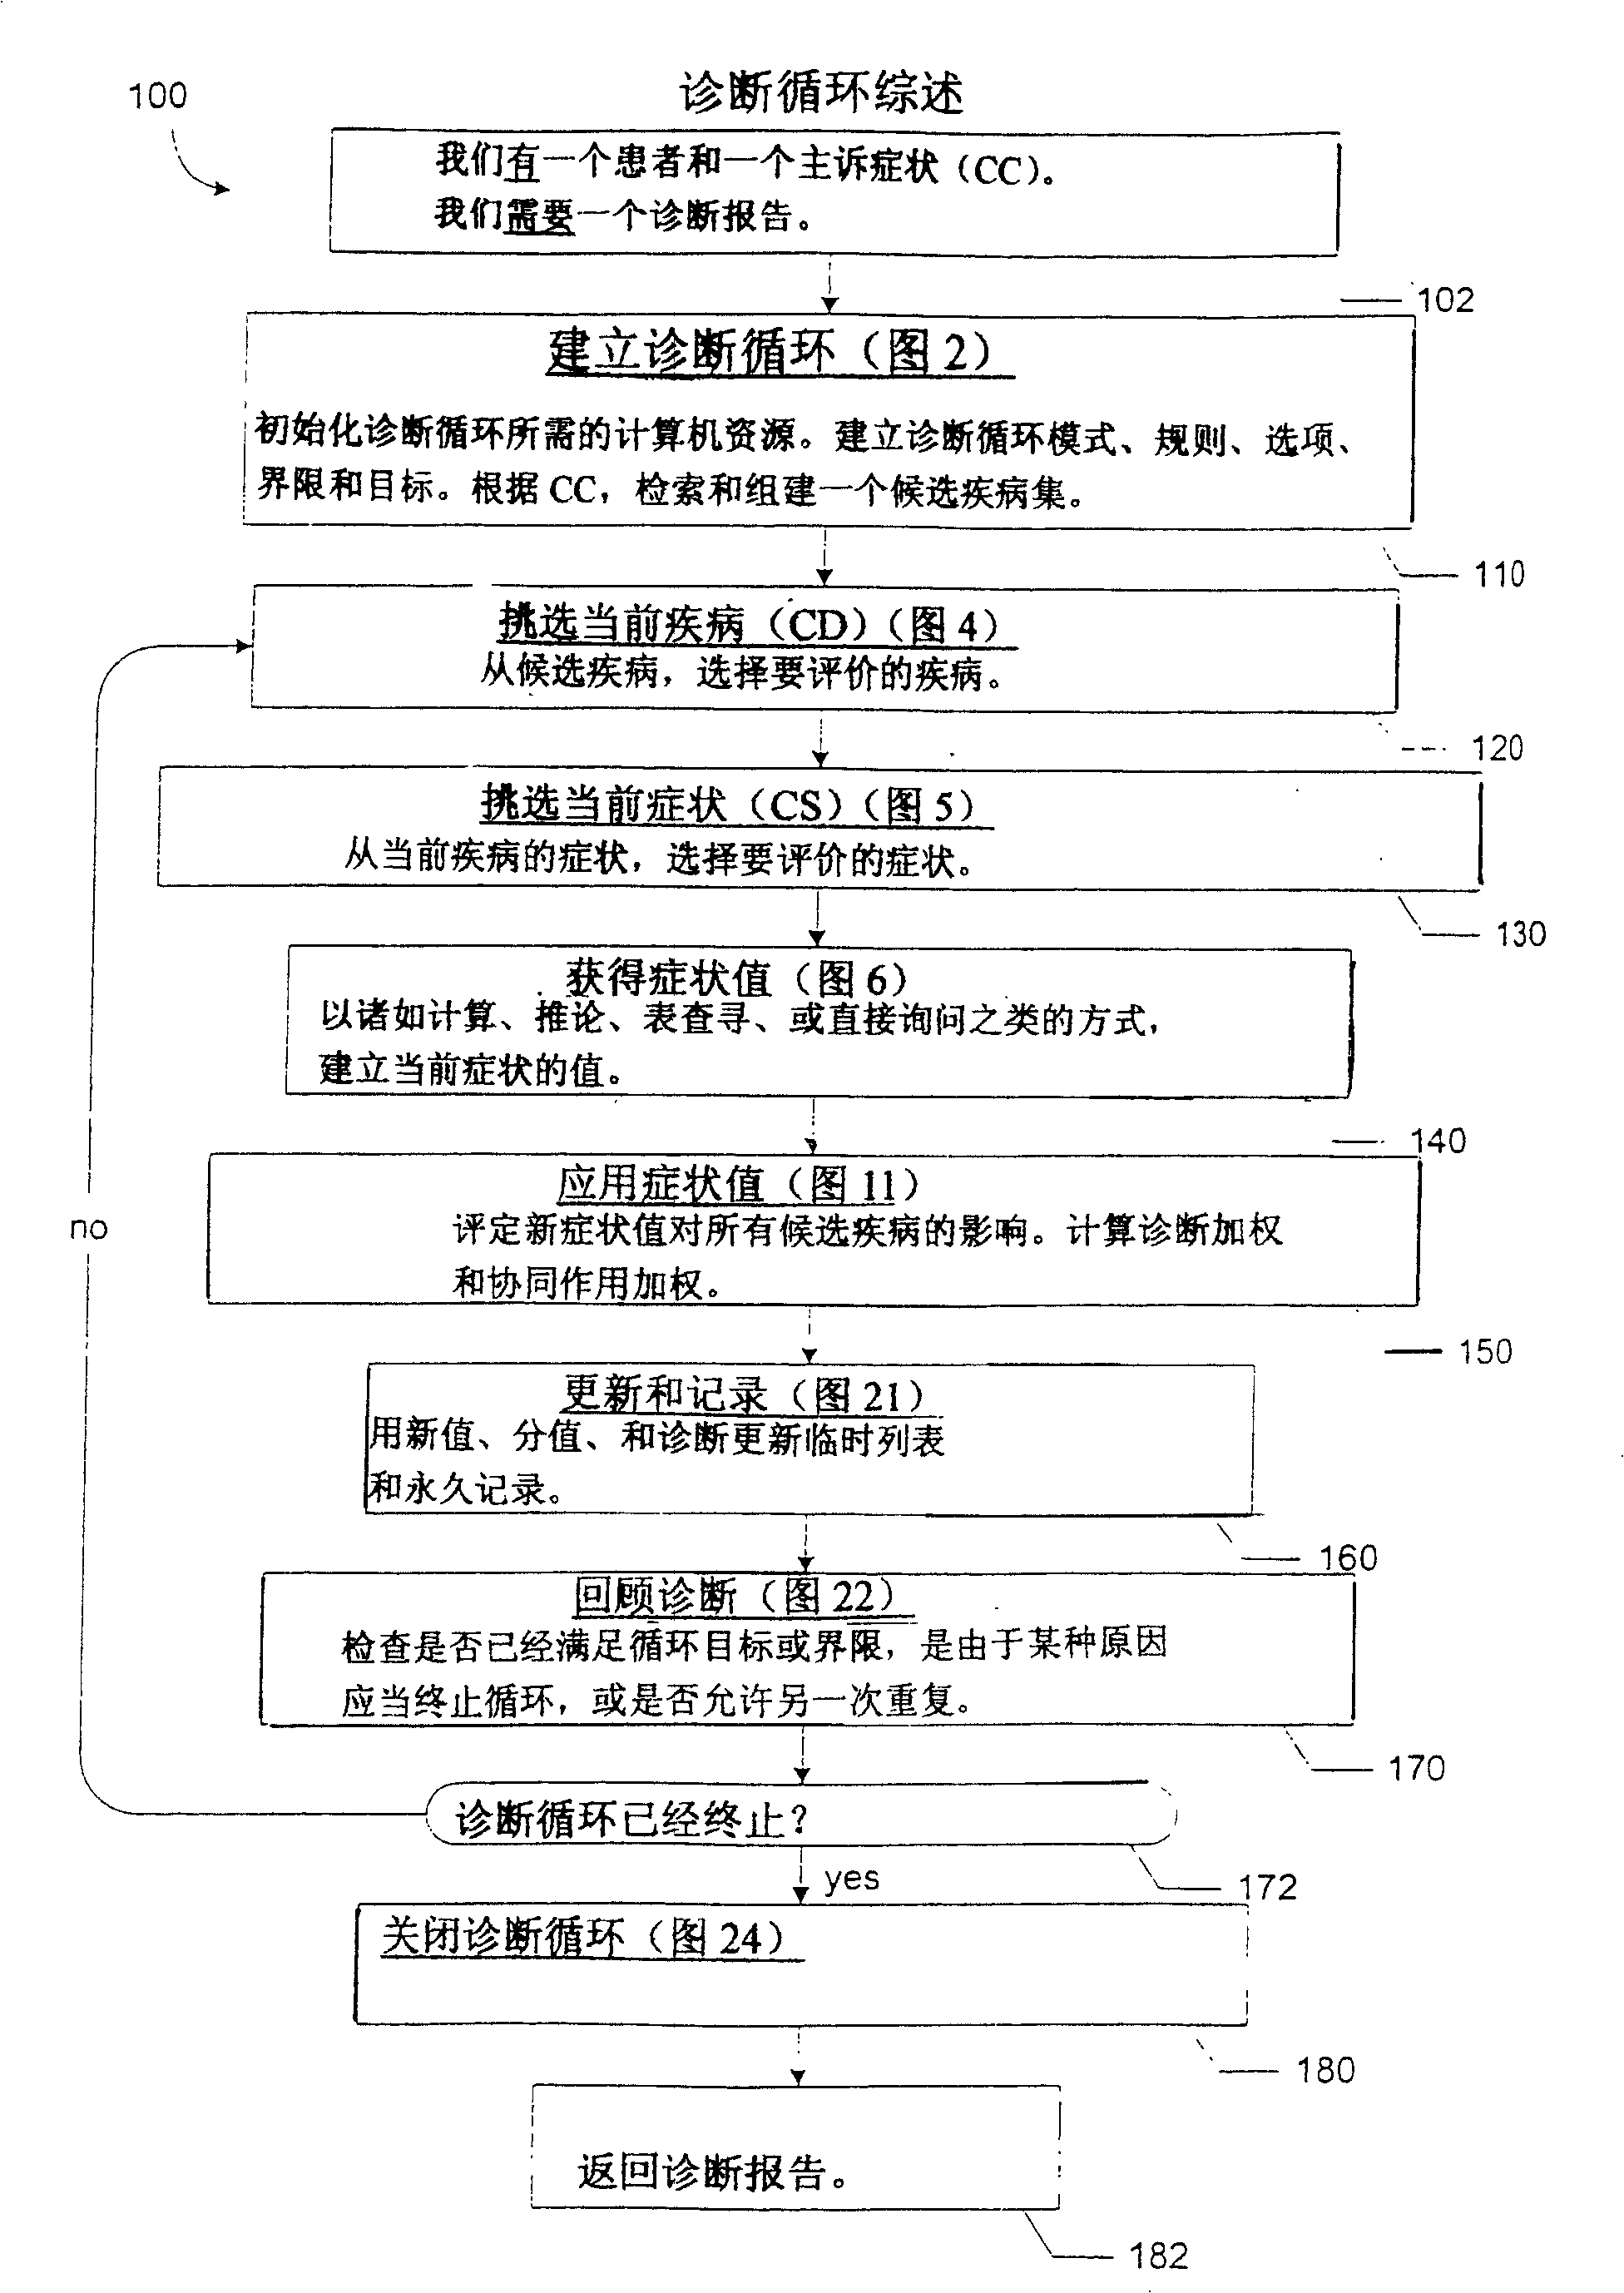 Automated diagnostic system and method